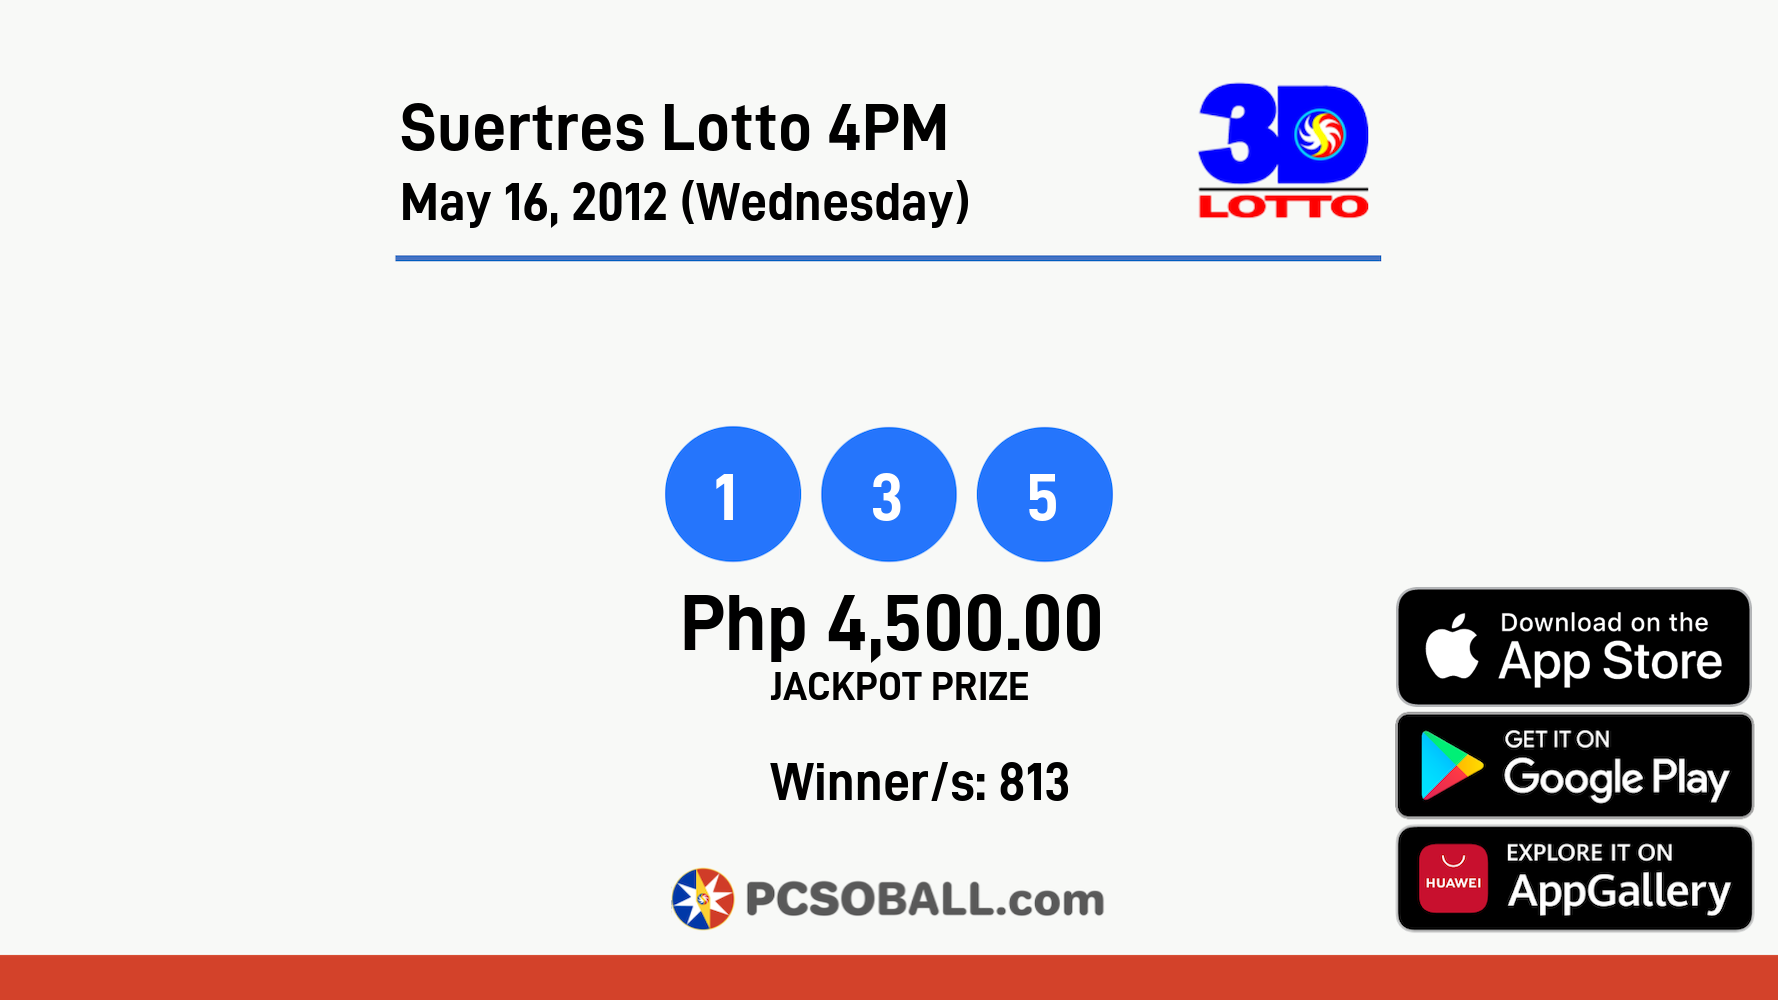 Suertres Lotto 4PM May 16, 2012 (Wednesday) Result